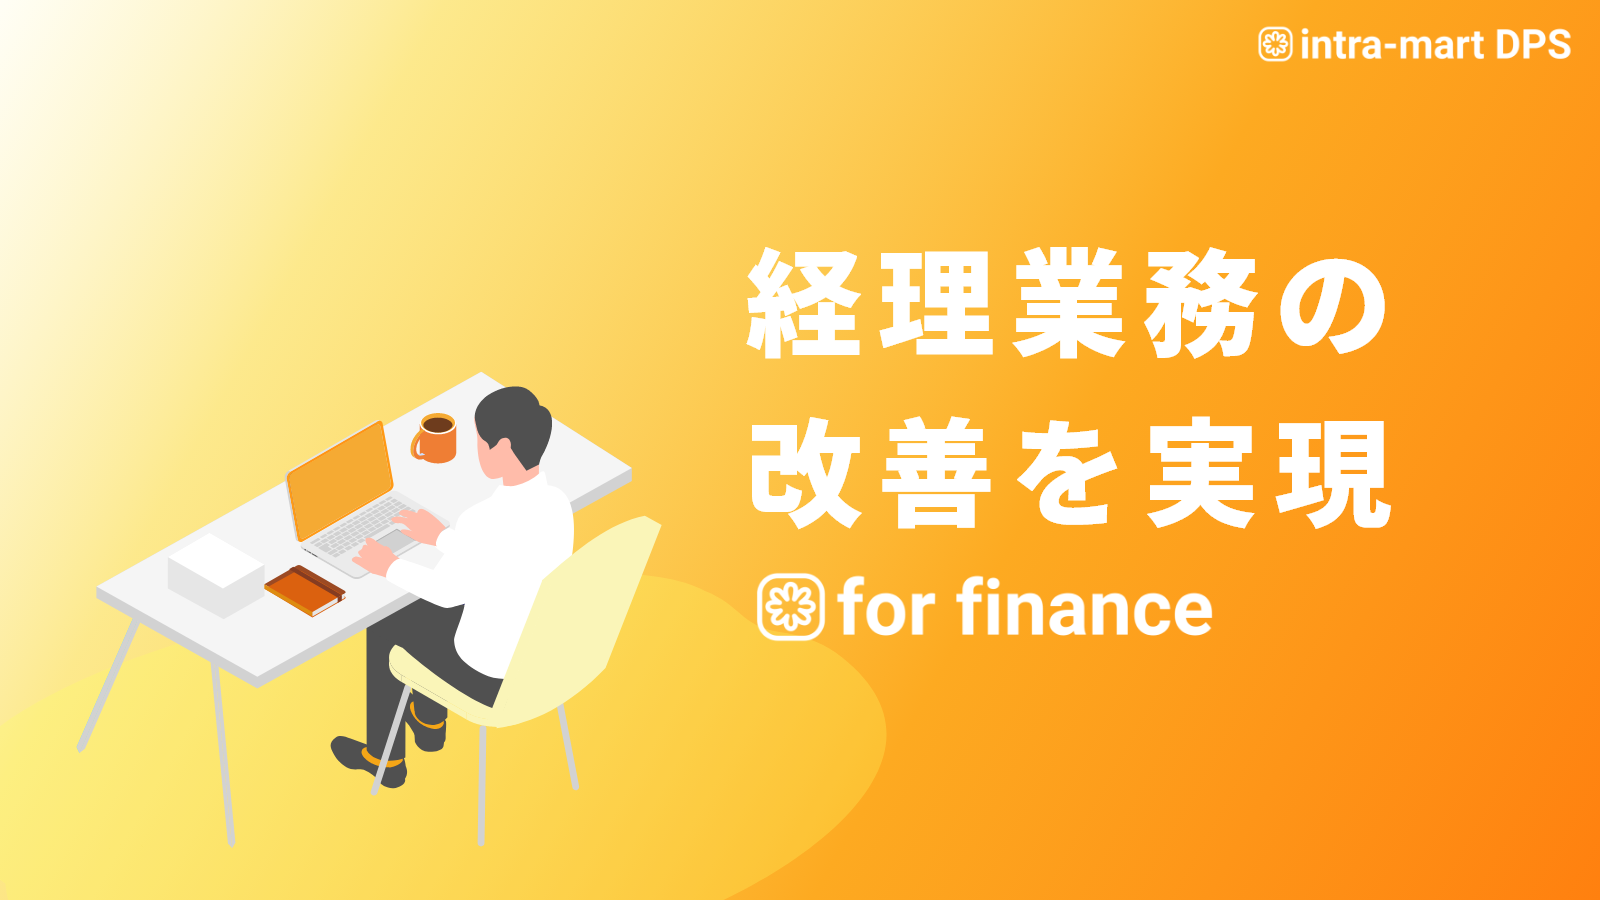 DPS for finance概要資料